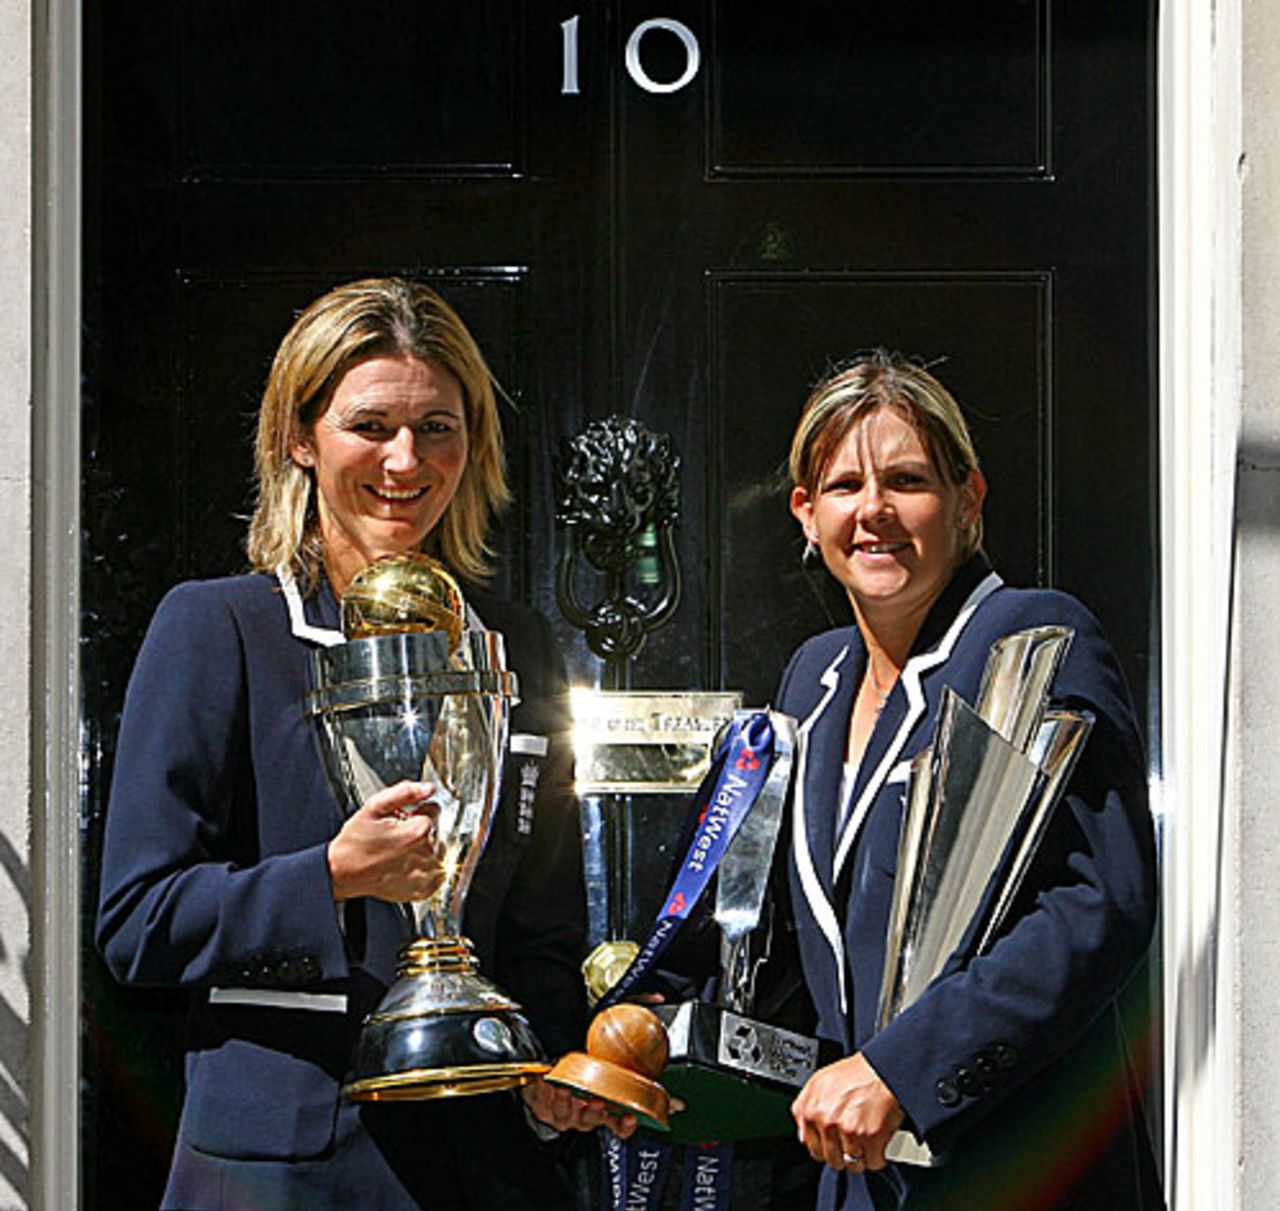 Charlotte Edwards and Nicky Shaw pose outside 10 Downing Street, London, July 14, 2009